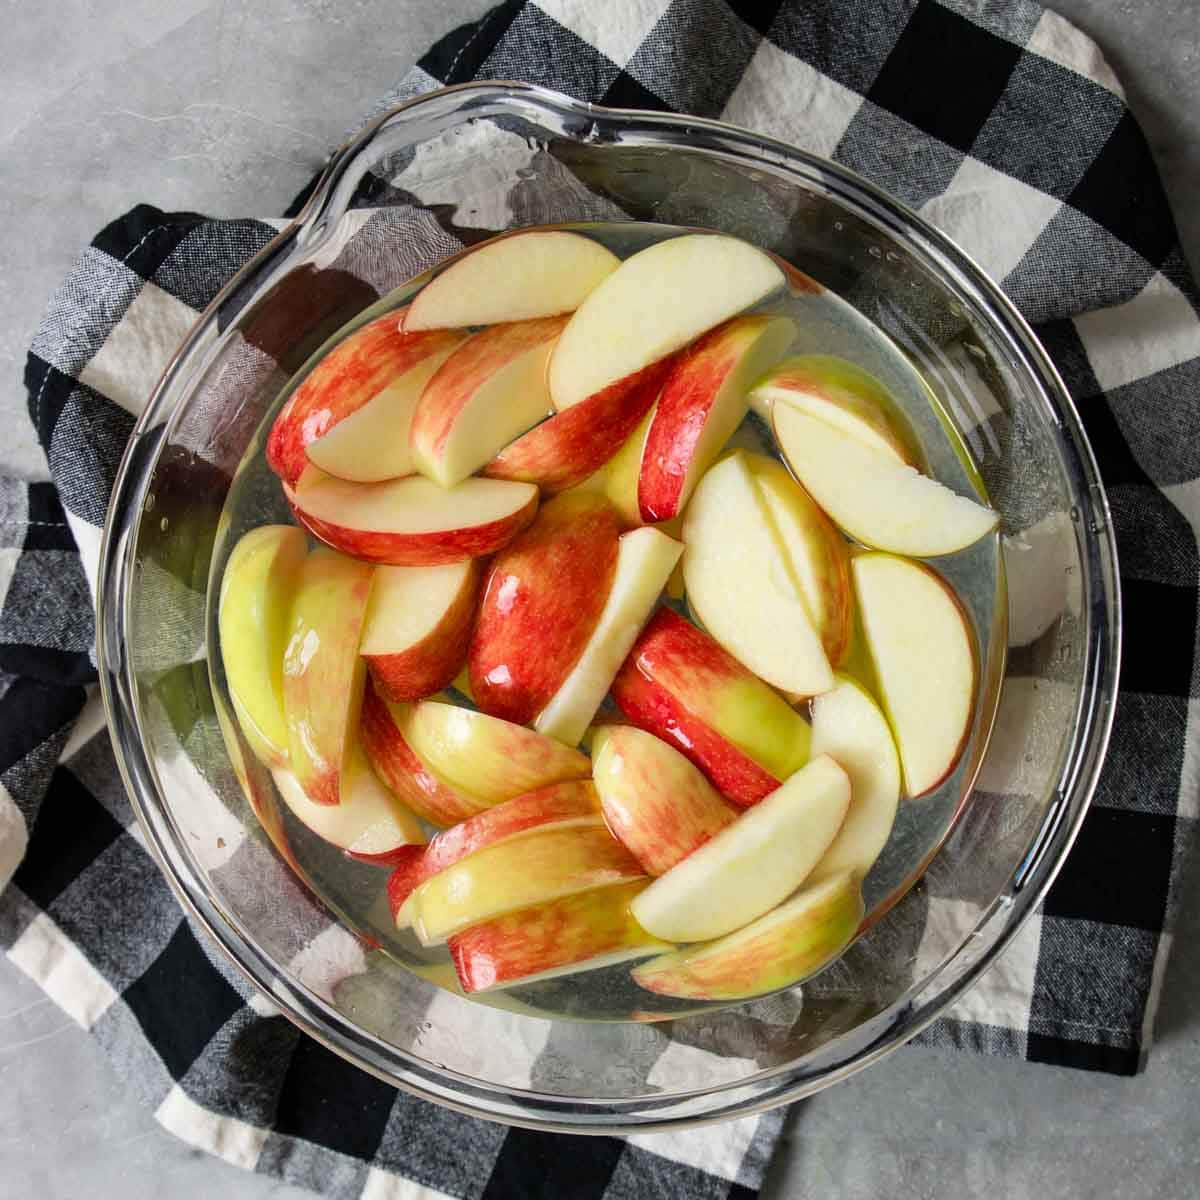 soaking apples in lemon water to prevent browning